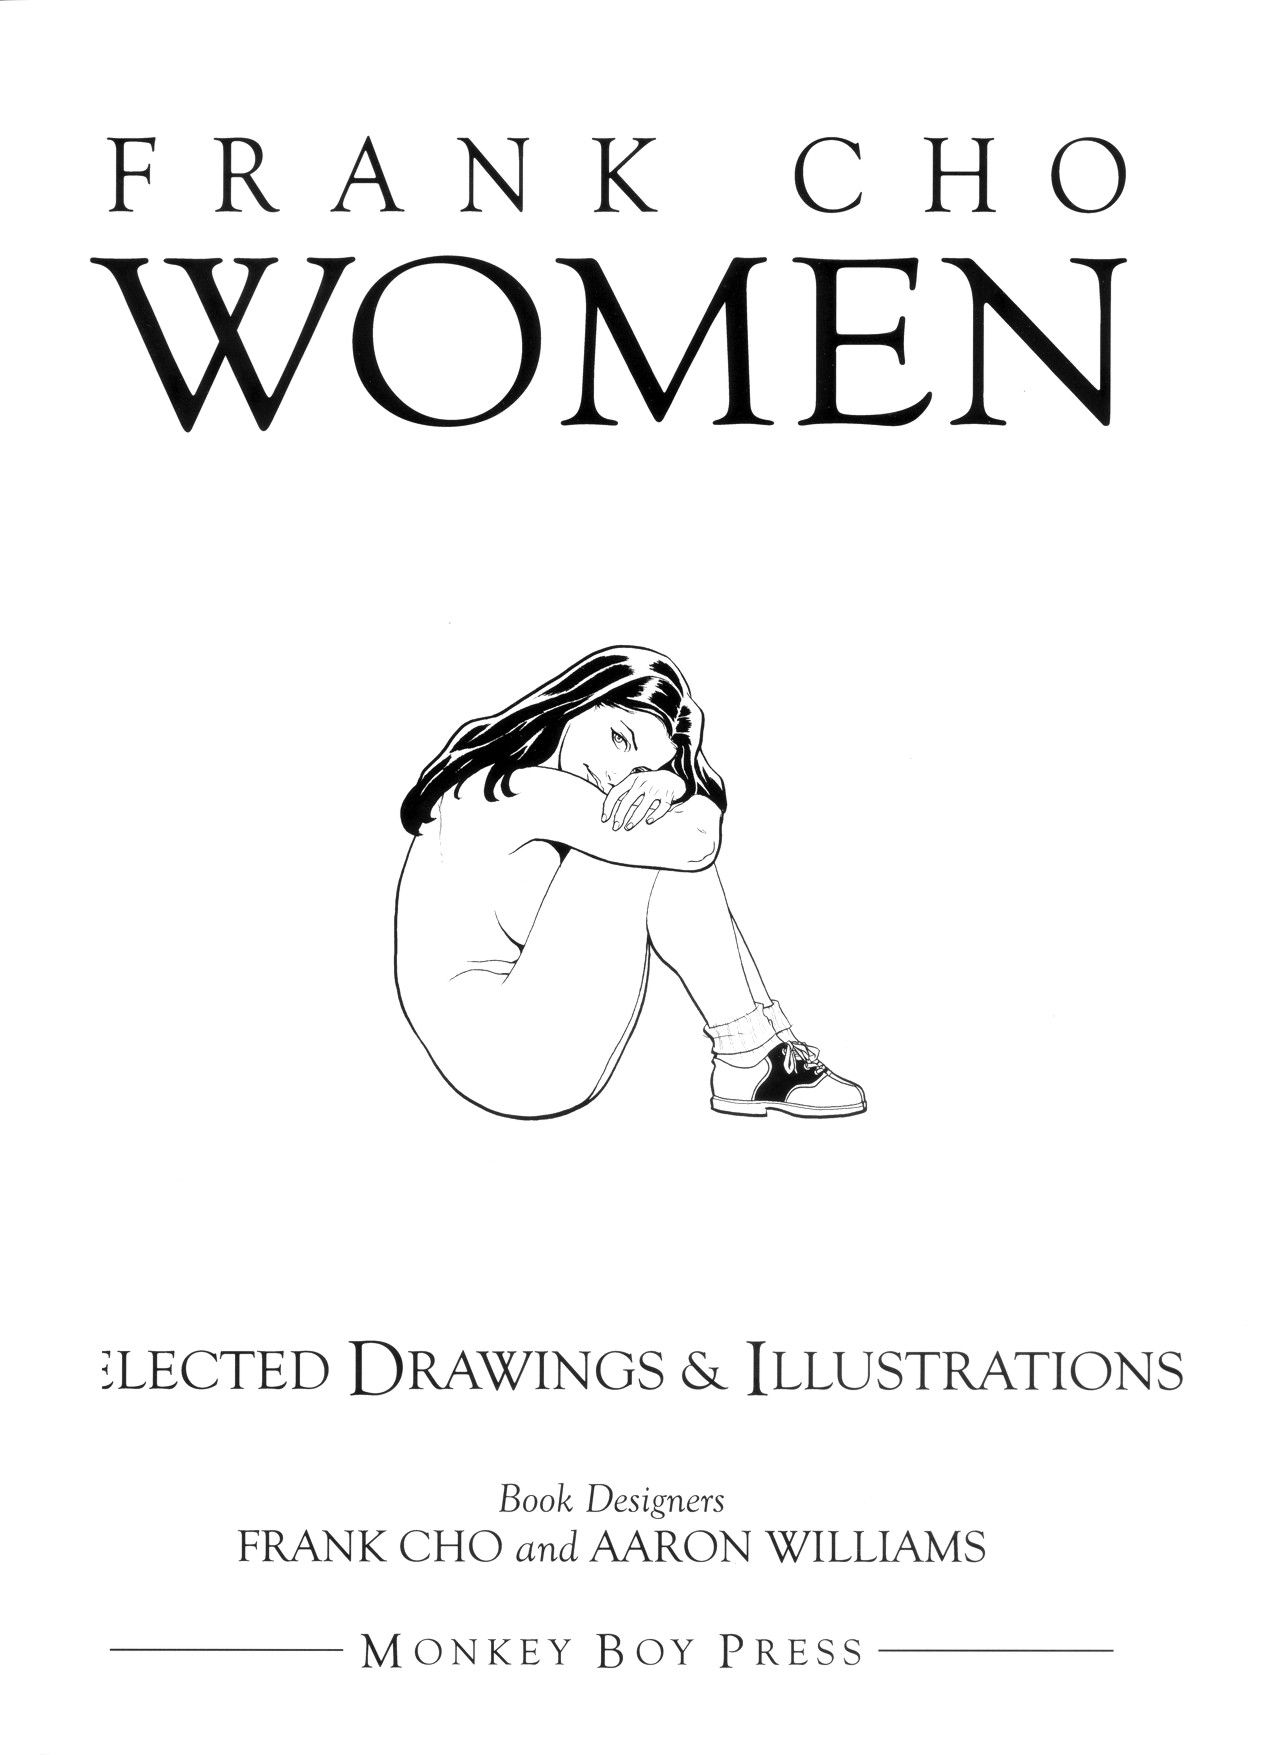 [Frank Cho] Women - Selected Drawings and Illustrations 3